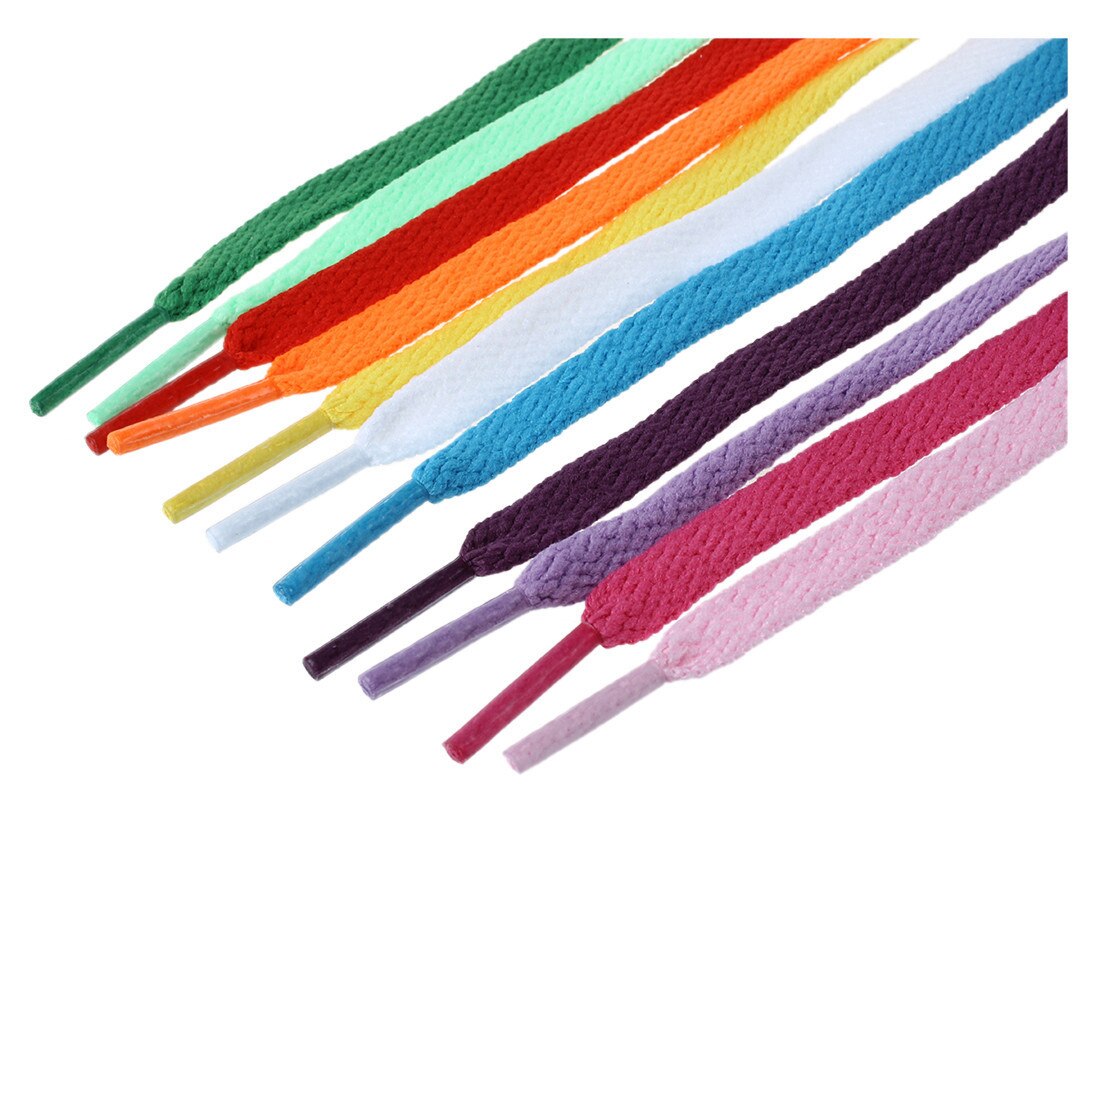 New 12 Pair of Broad laces For Shoes Boots - 8mm - 12 Colors - ebowsos